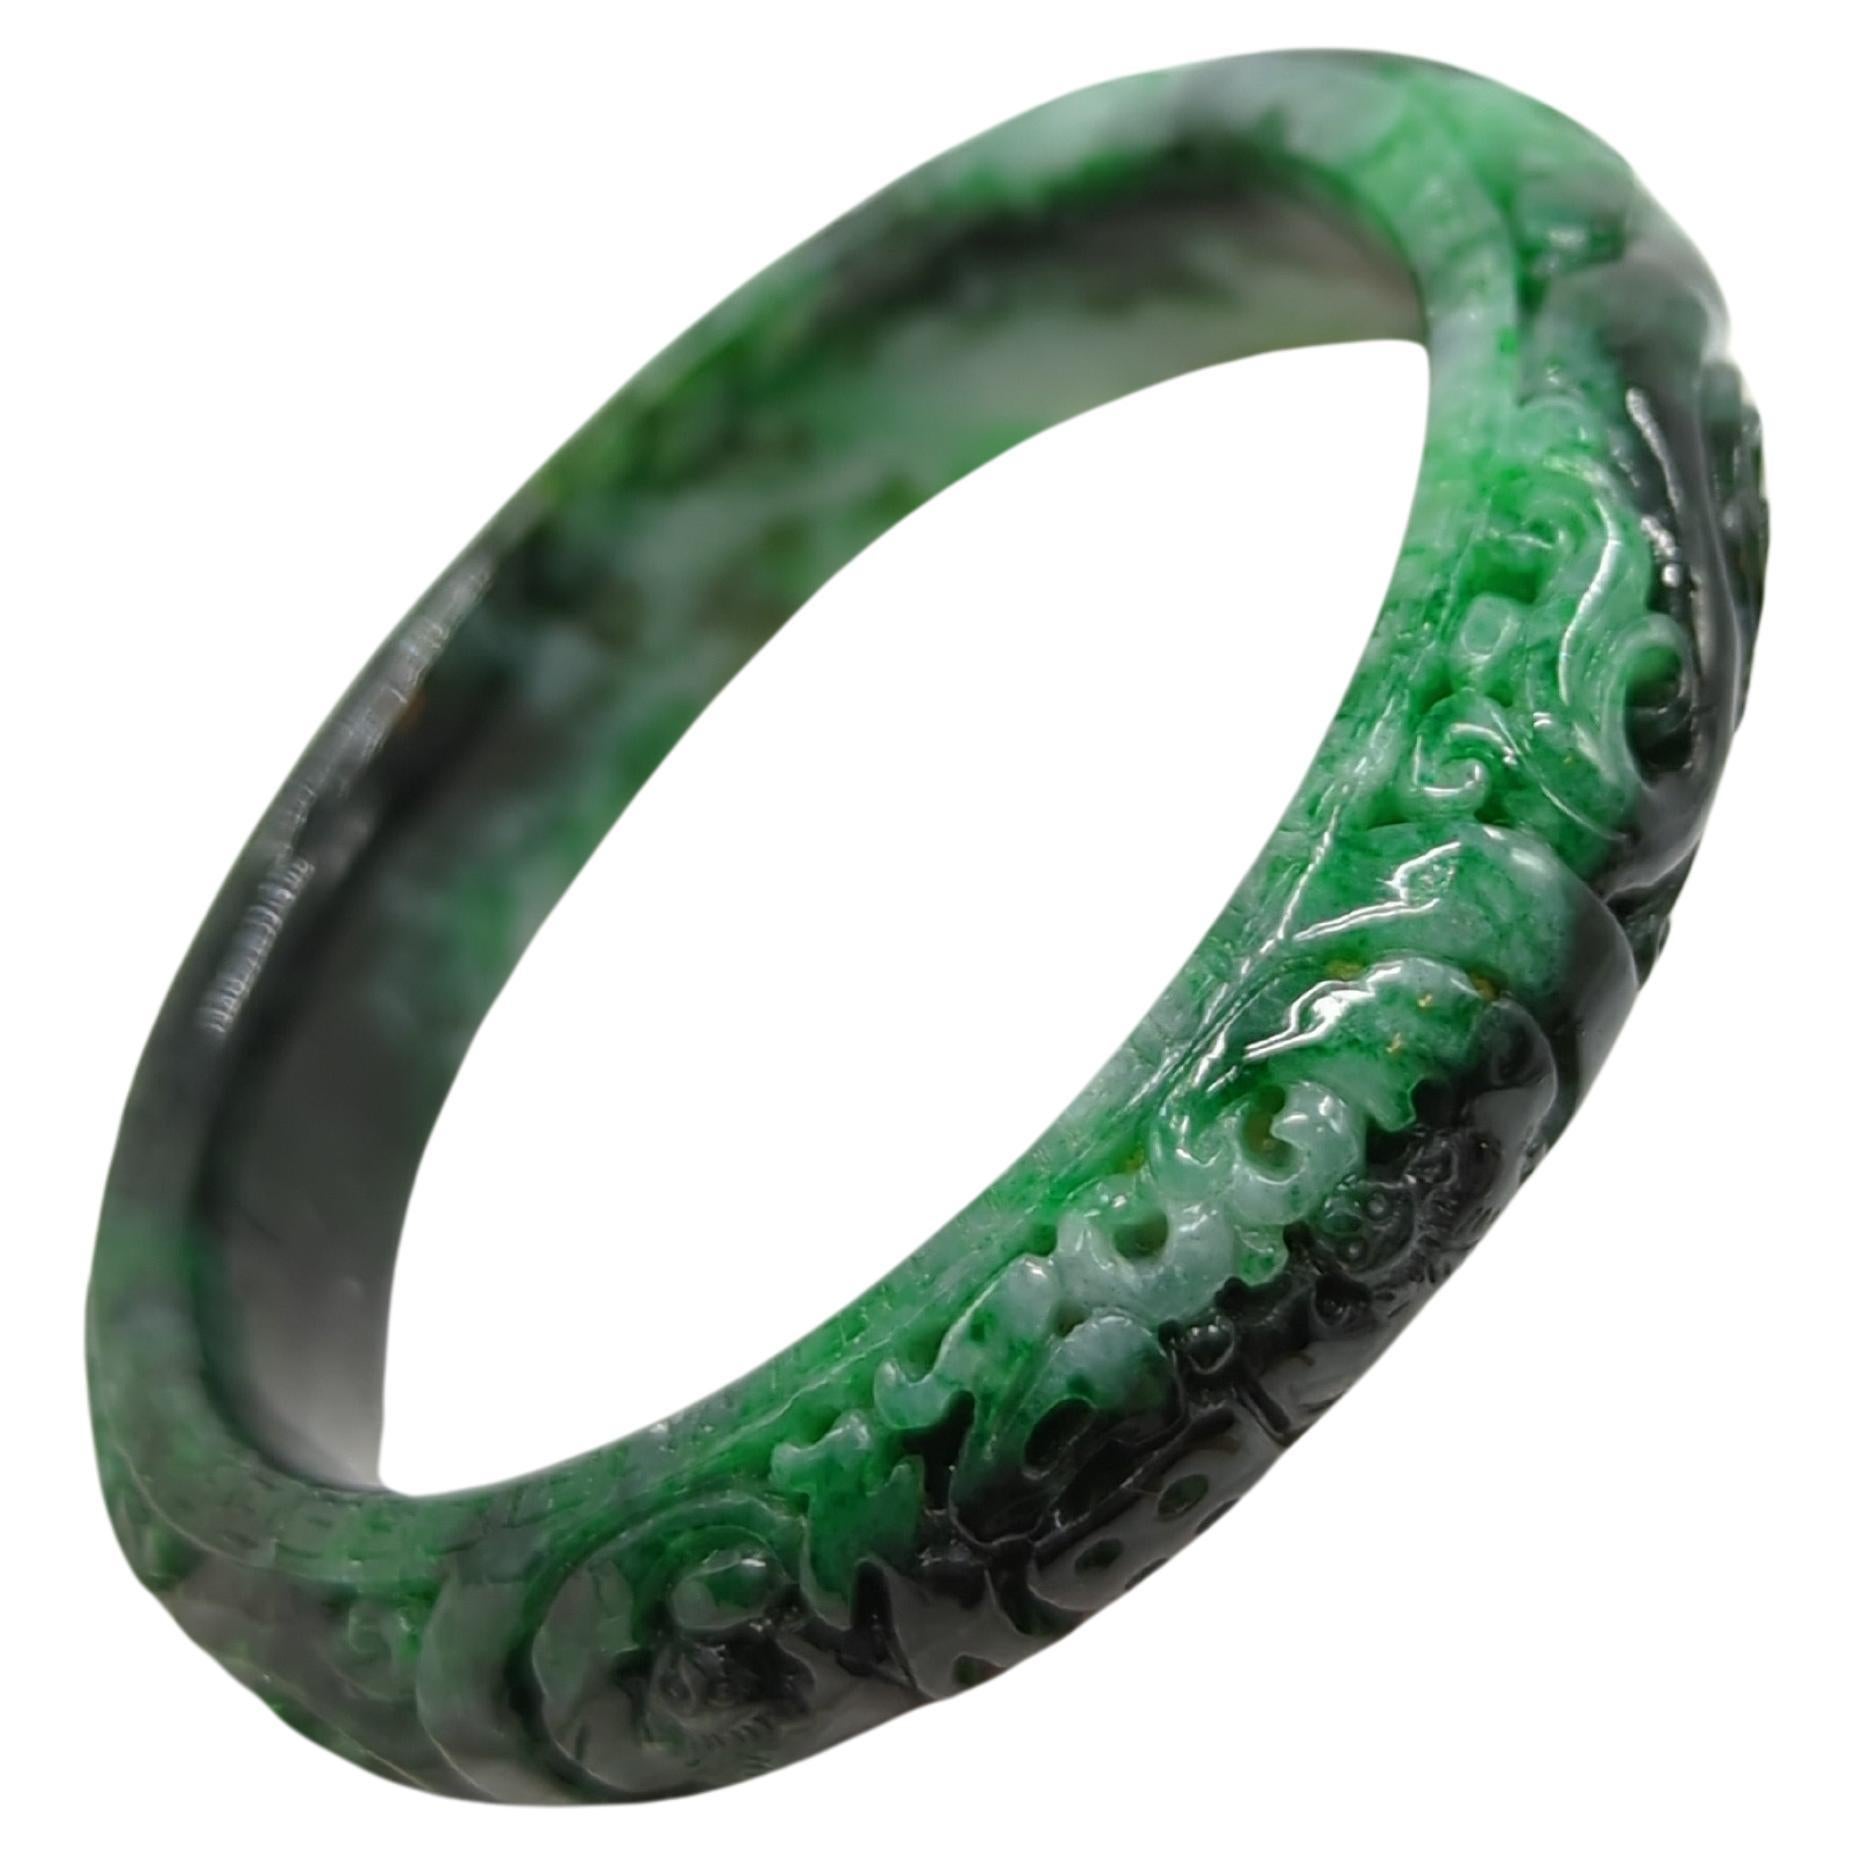 A heavily carved vintage Chinese natural jadeite bangle, with rich natural mottled colors including pale green, emerald green to dark ink green

ID: 60mm
OD: 79mm
Width: 14.5mm
Weight: 68 grams
Grade: A-grade jadeite, no enhancements, completely